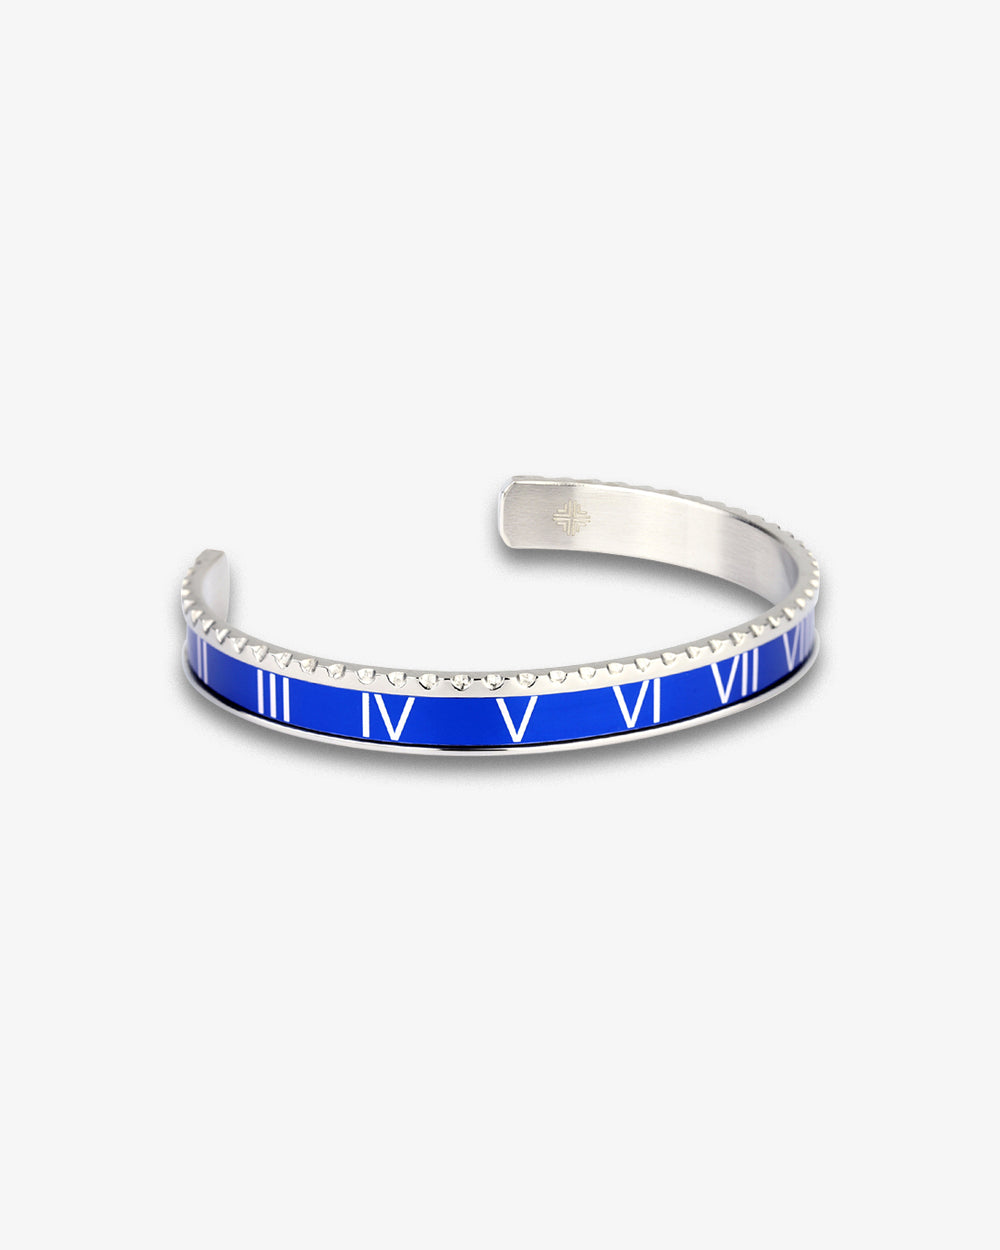 Swiss Concept Classic Roman Numeral Speed Bracelet (Blue & Stainless Steel) - Polished Finish